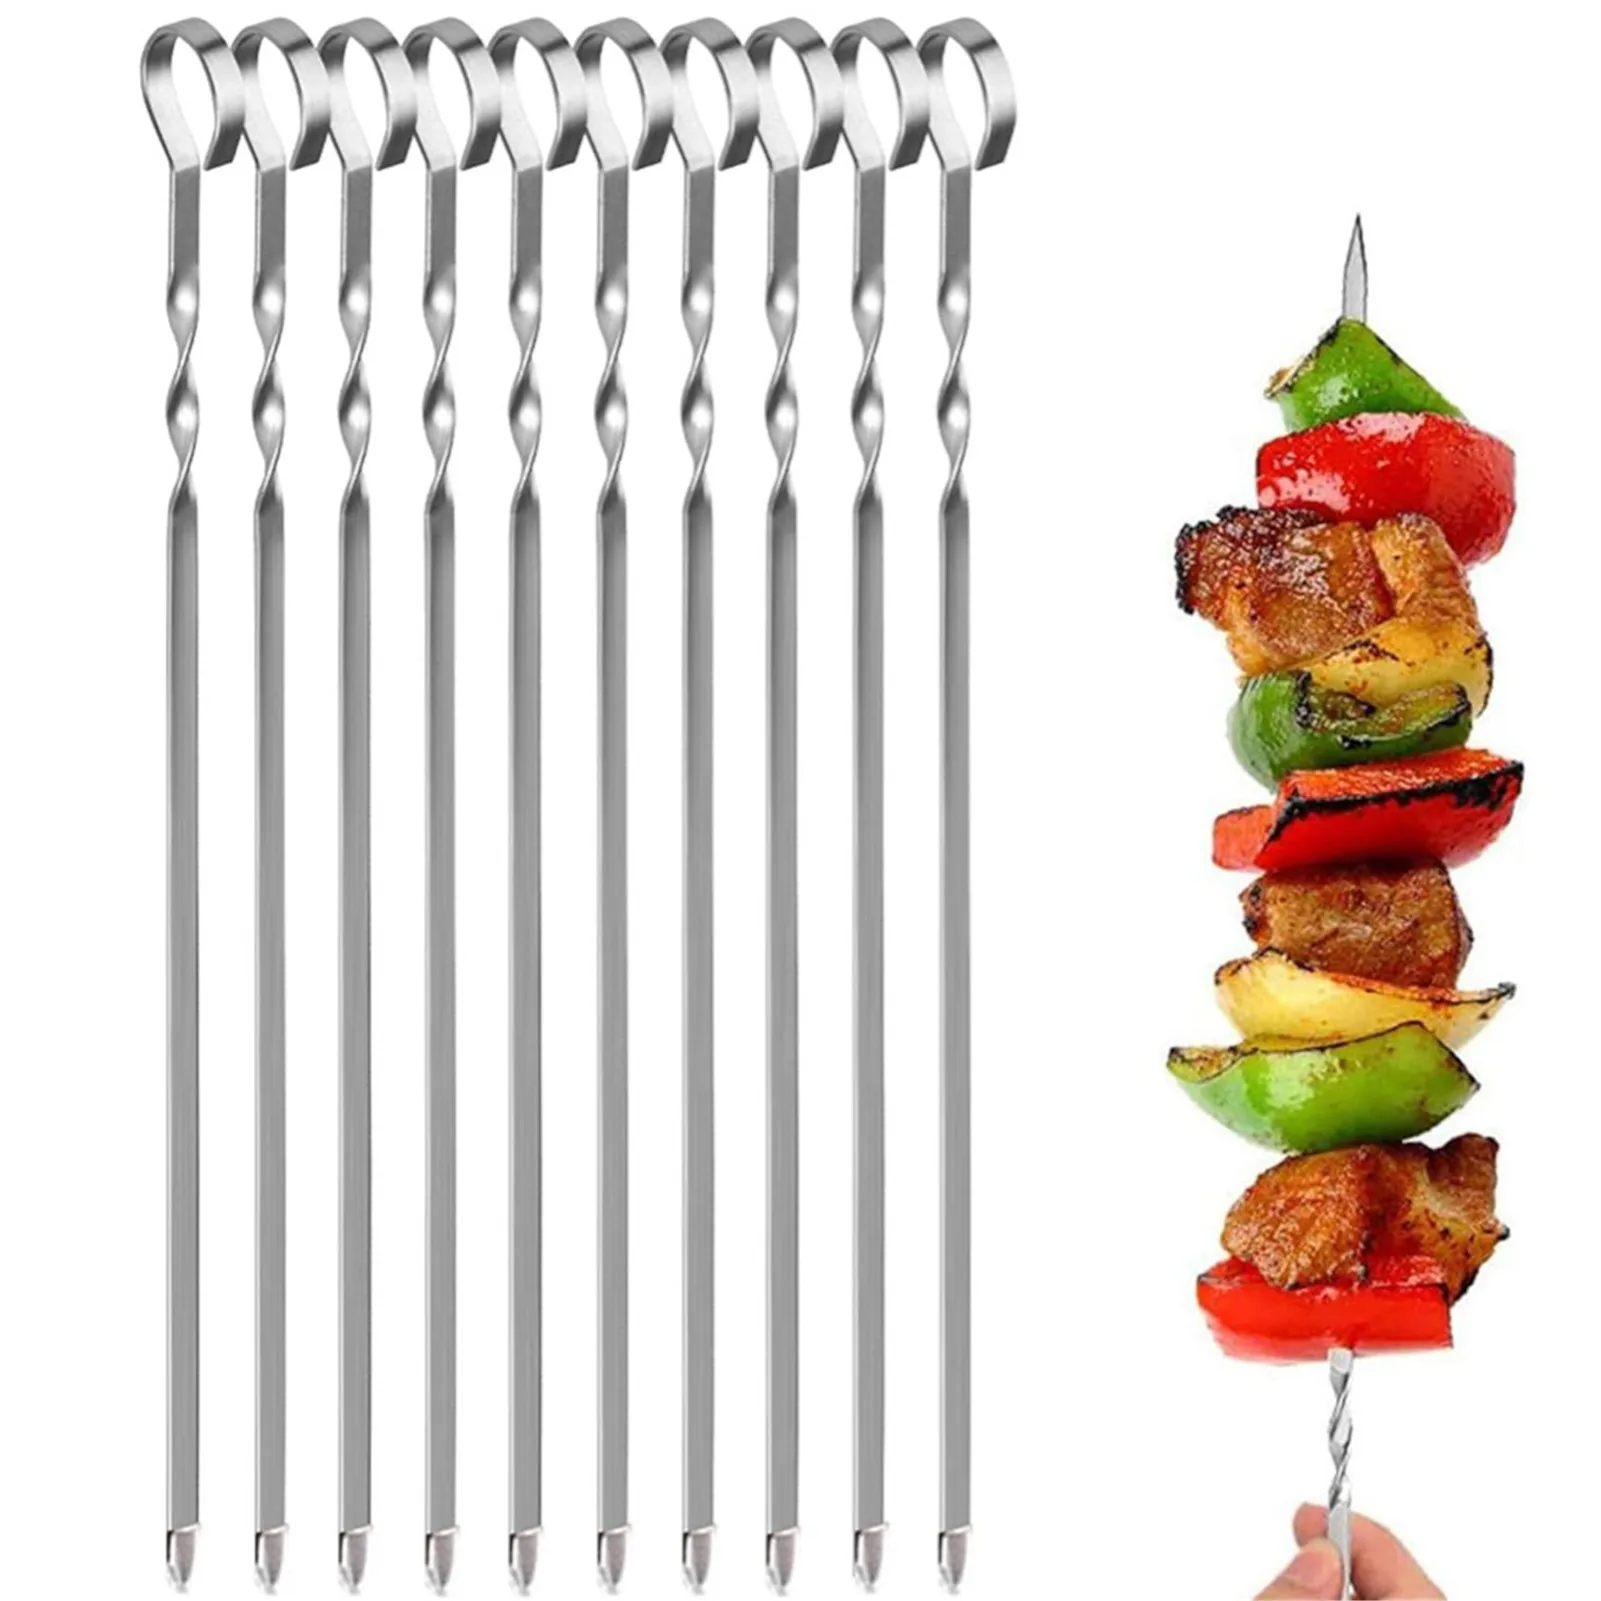 

10pcs/set Stainless Steel Barbecue Skewers BBQ Thickened Barbecue Tool Shish Kebab Kabob Skewers Outdoor BBQ Accessories